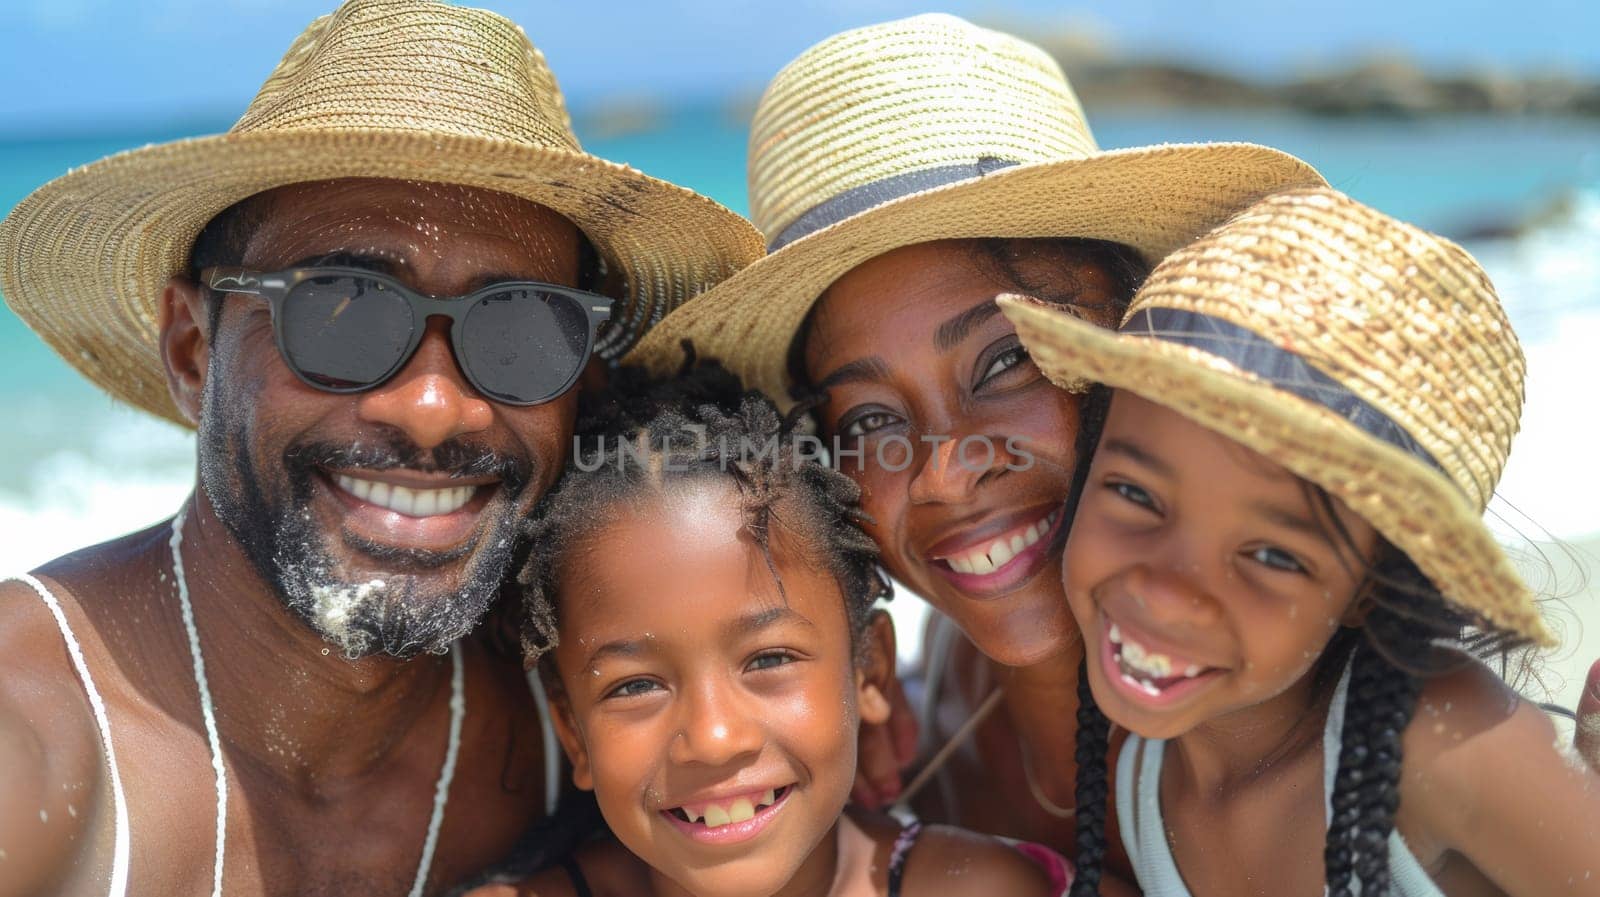 A family of three people wearing hats and sunglasses on the beach, AI by starush